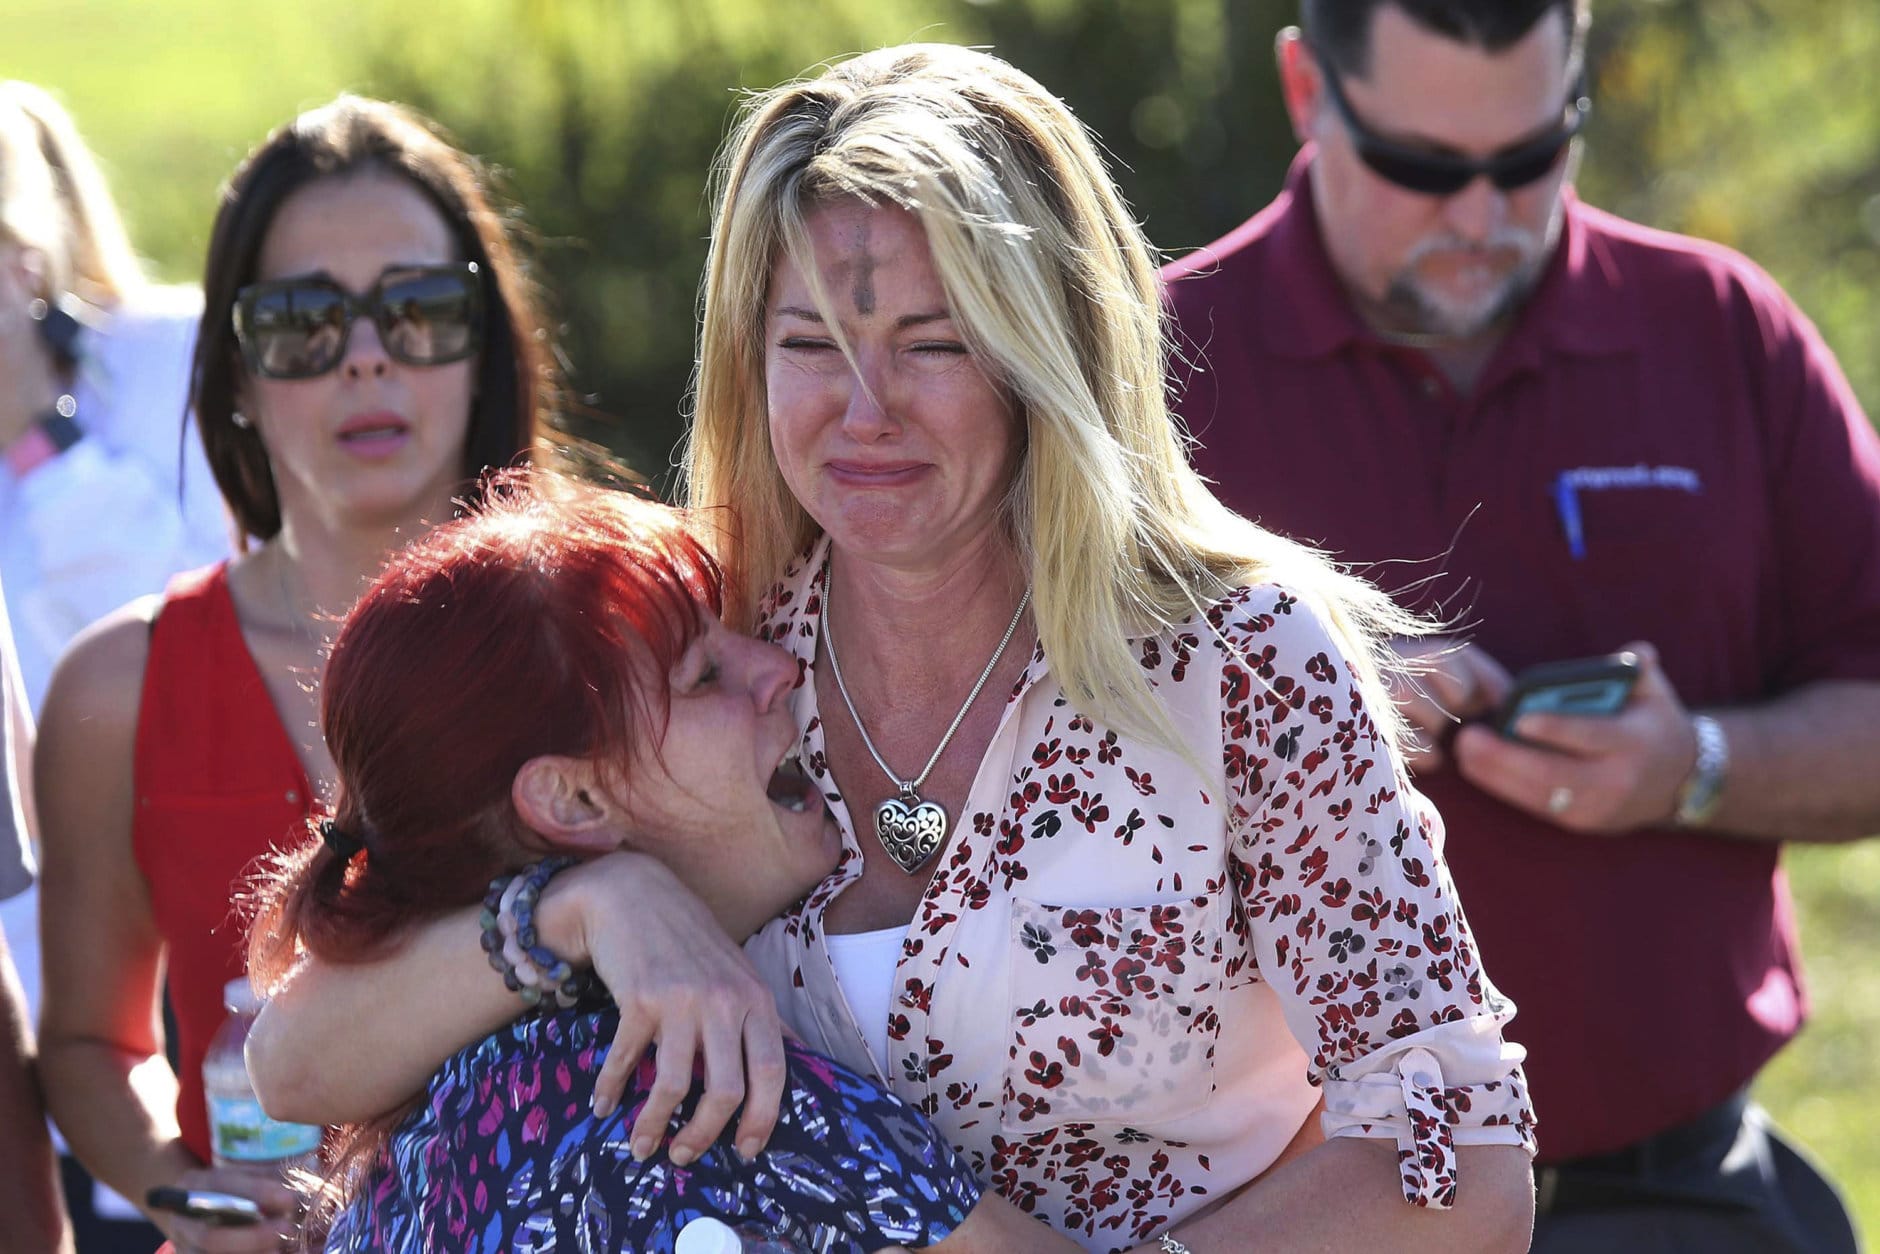 Parents wait for news of their loved ones after a mass shooting at Marjory Stoneman Douglas High School in Parkland, Fla., on Feb. 14, 2018. (AP Photo/Joel Auerbach)